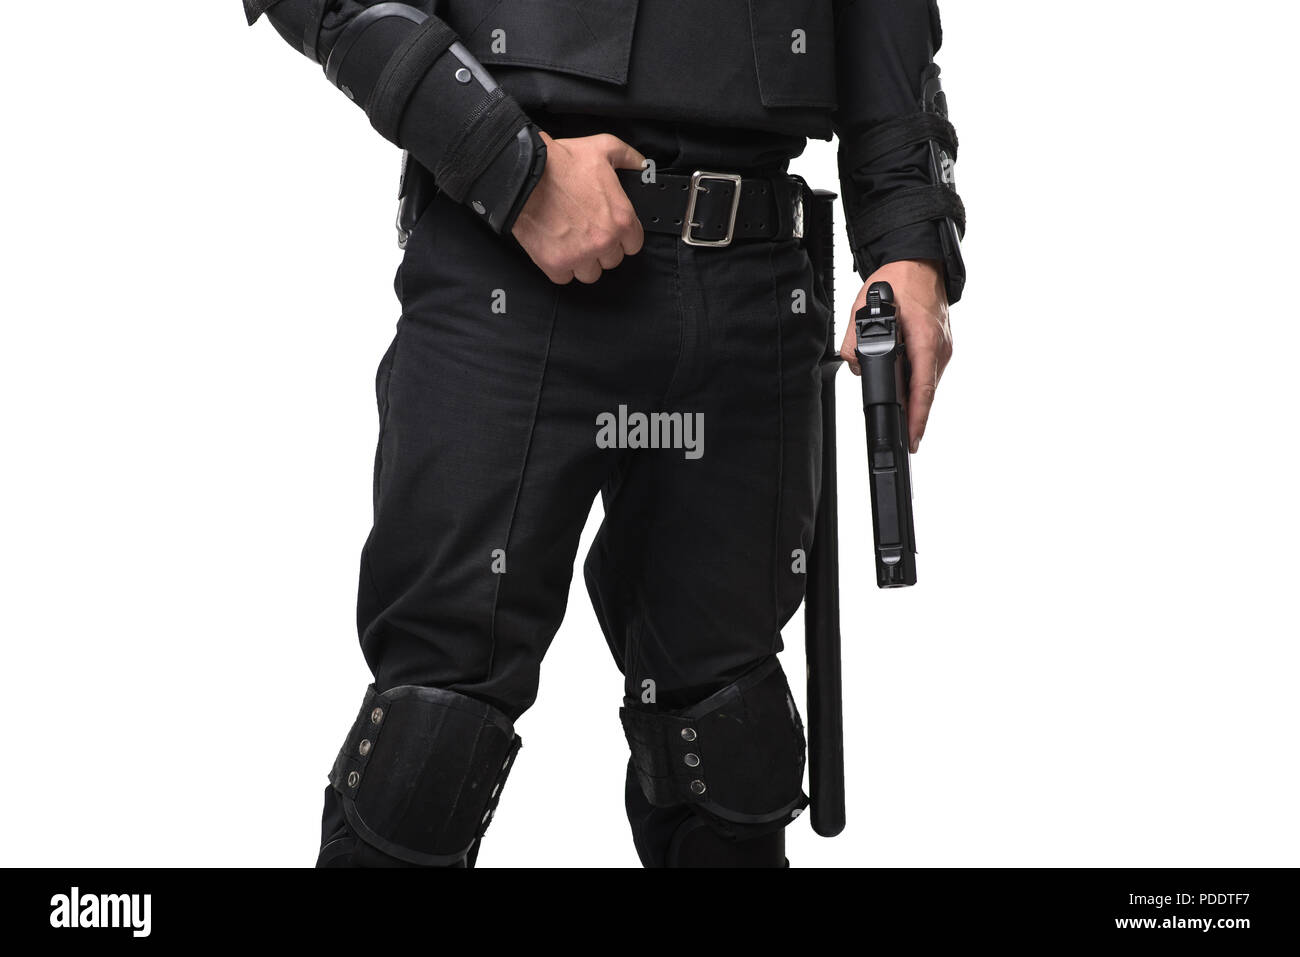 Armed special force soldier in black uniform Stock Photo